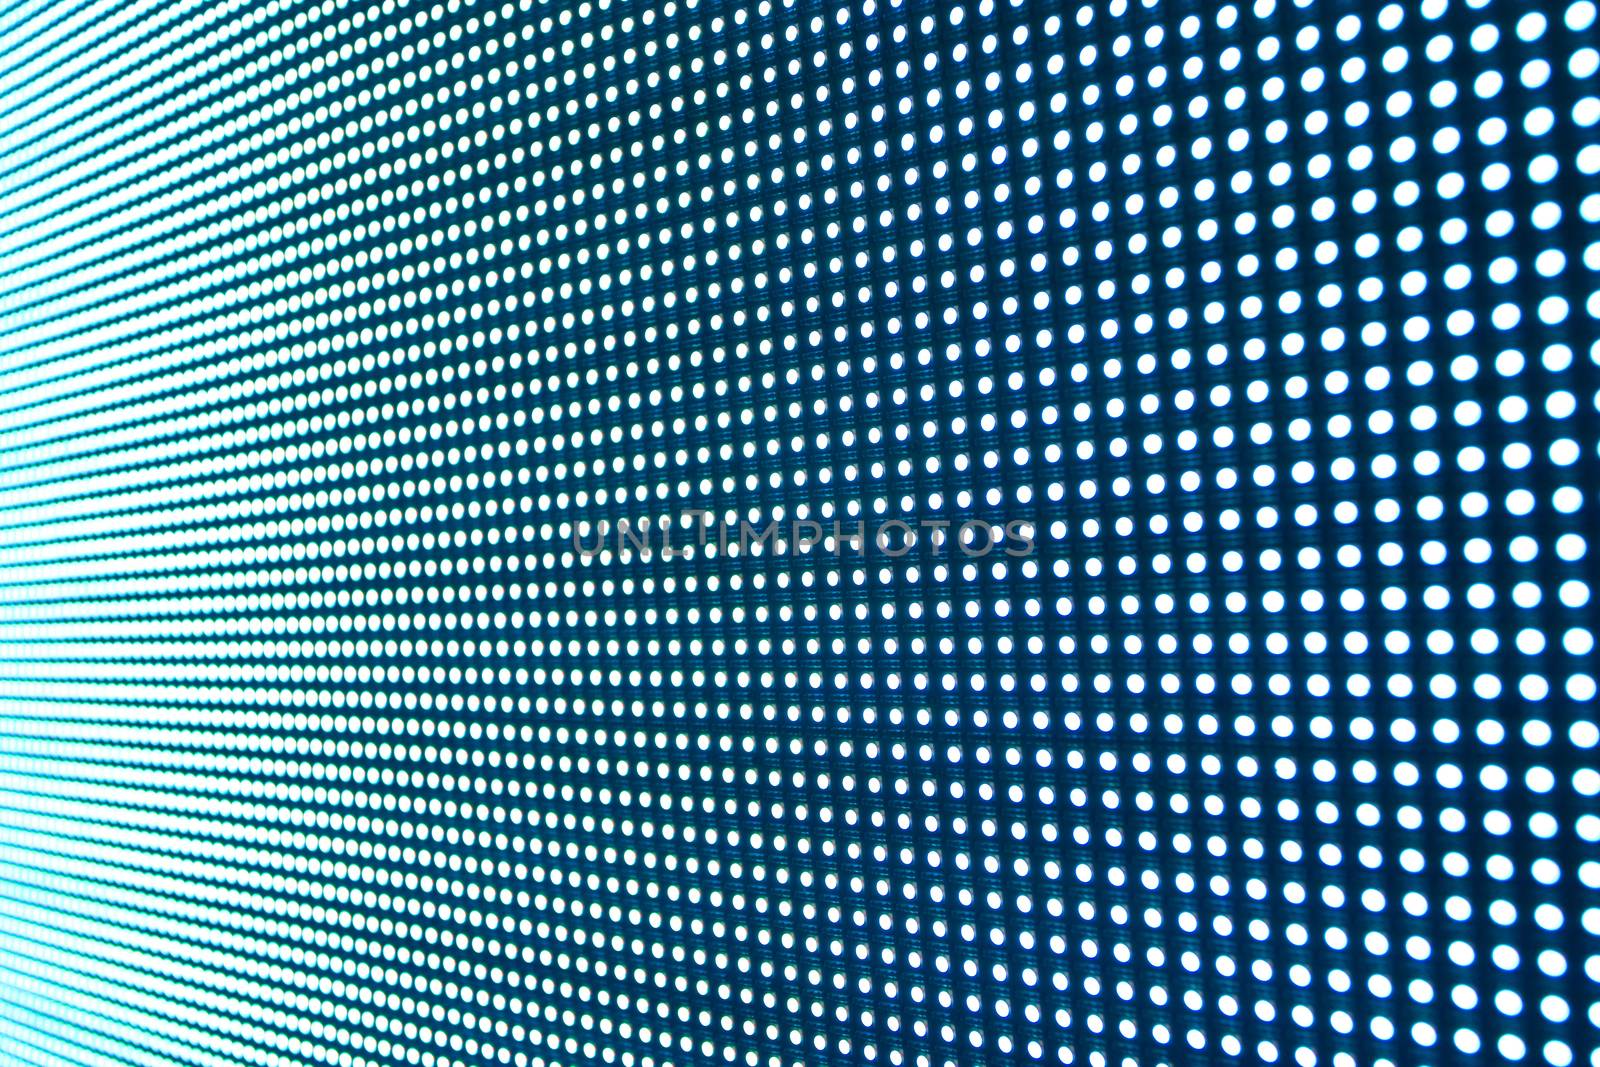 LED display screen background texture by myyaym